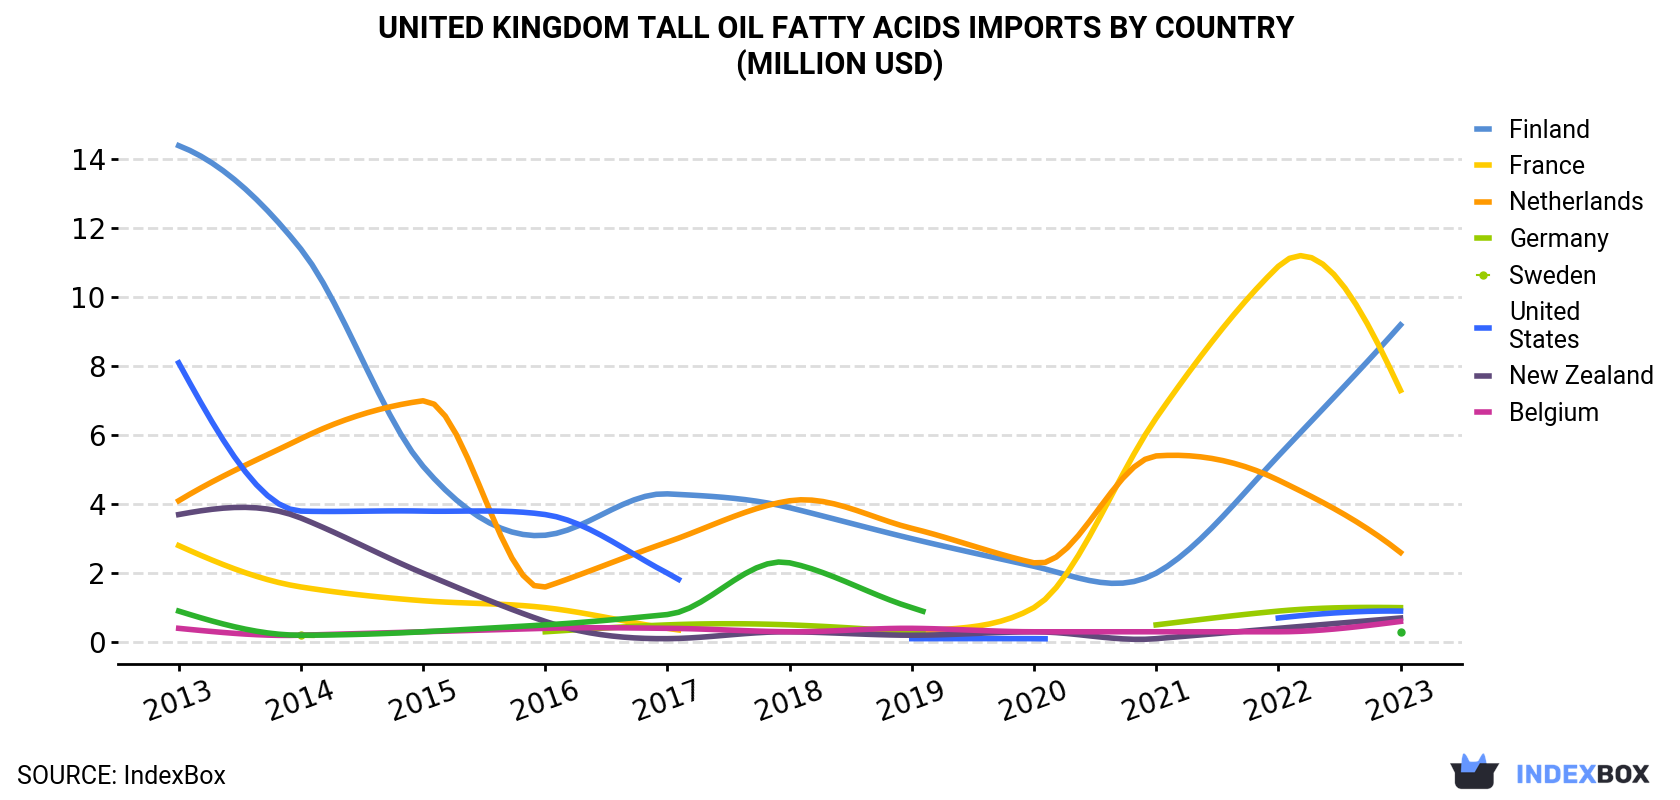 United Kingdom Tall Oil Fatty Acids Imports By Country (Million USD)